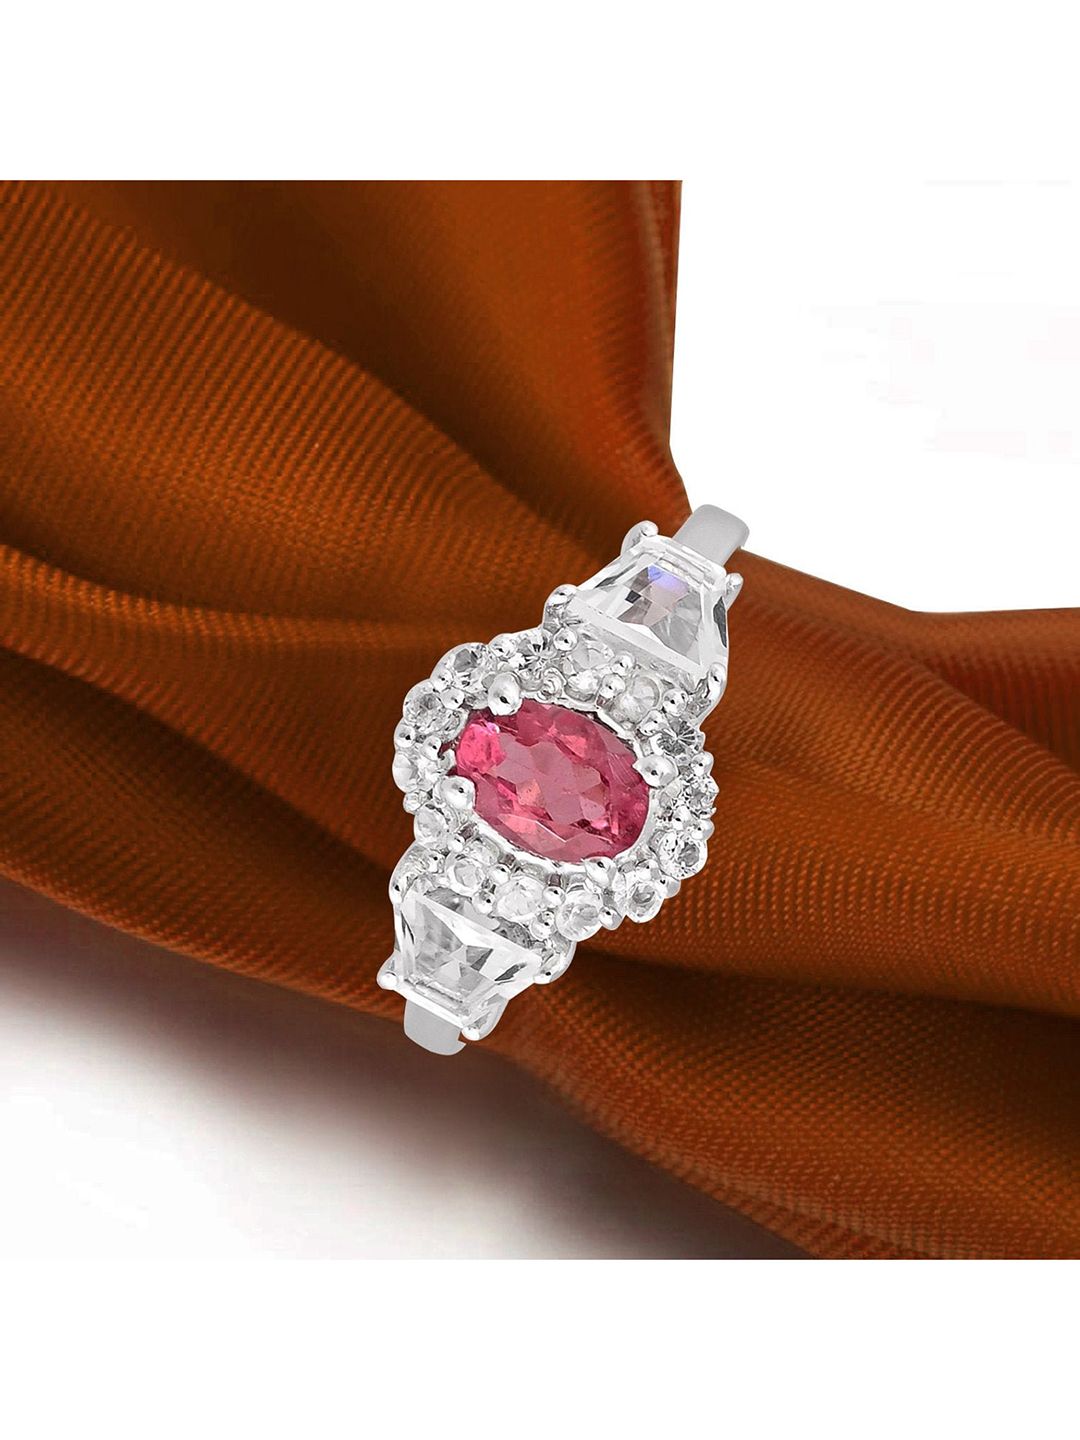 HIFLYER JEWELS Rhodium-Plated Silver-Toned & Pink Tourmaline & Topaz-Studded Finger Ring Price in India